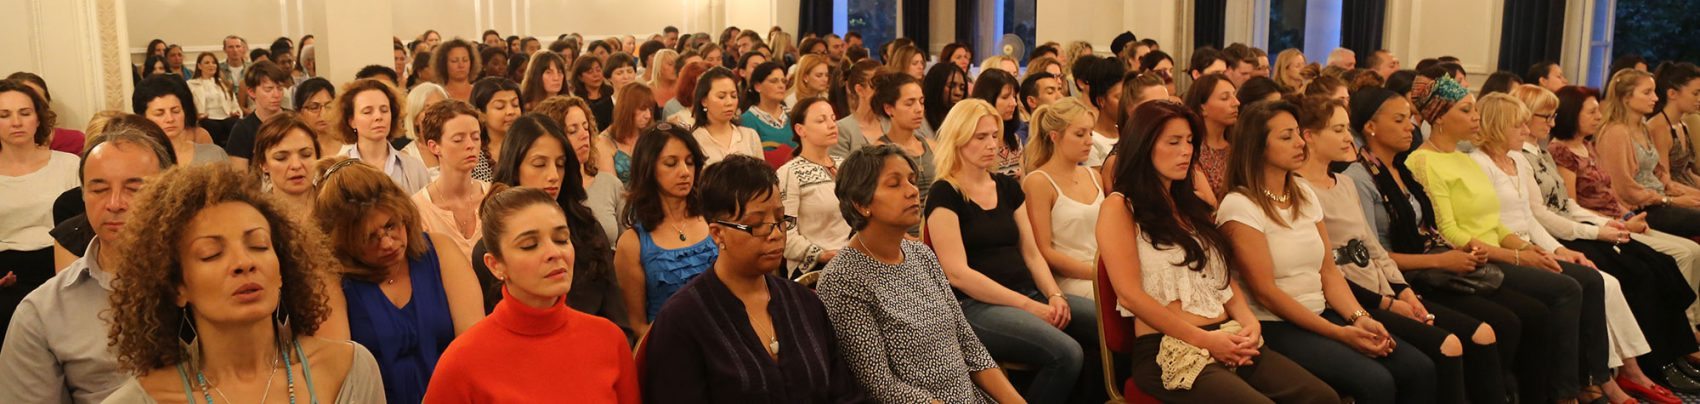 MeditationEvening Crowd - ThetaHealing® Meditation Evening and Sound Bath - Heal Your Life